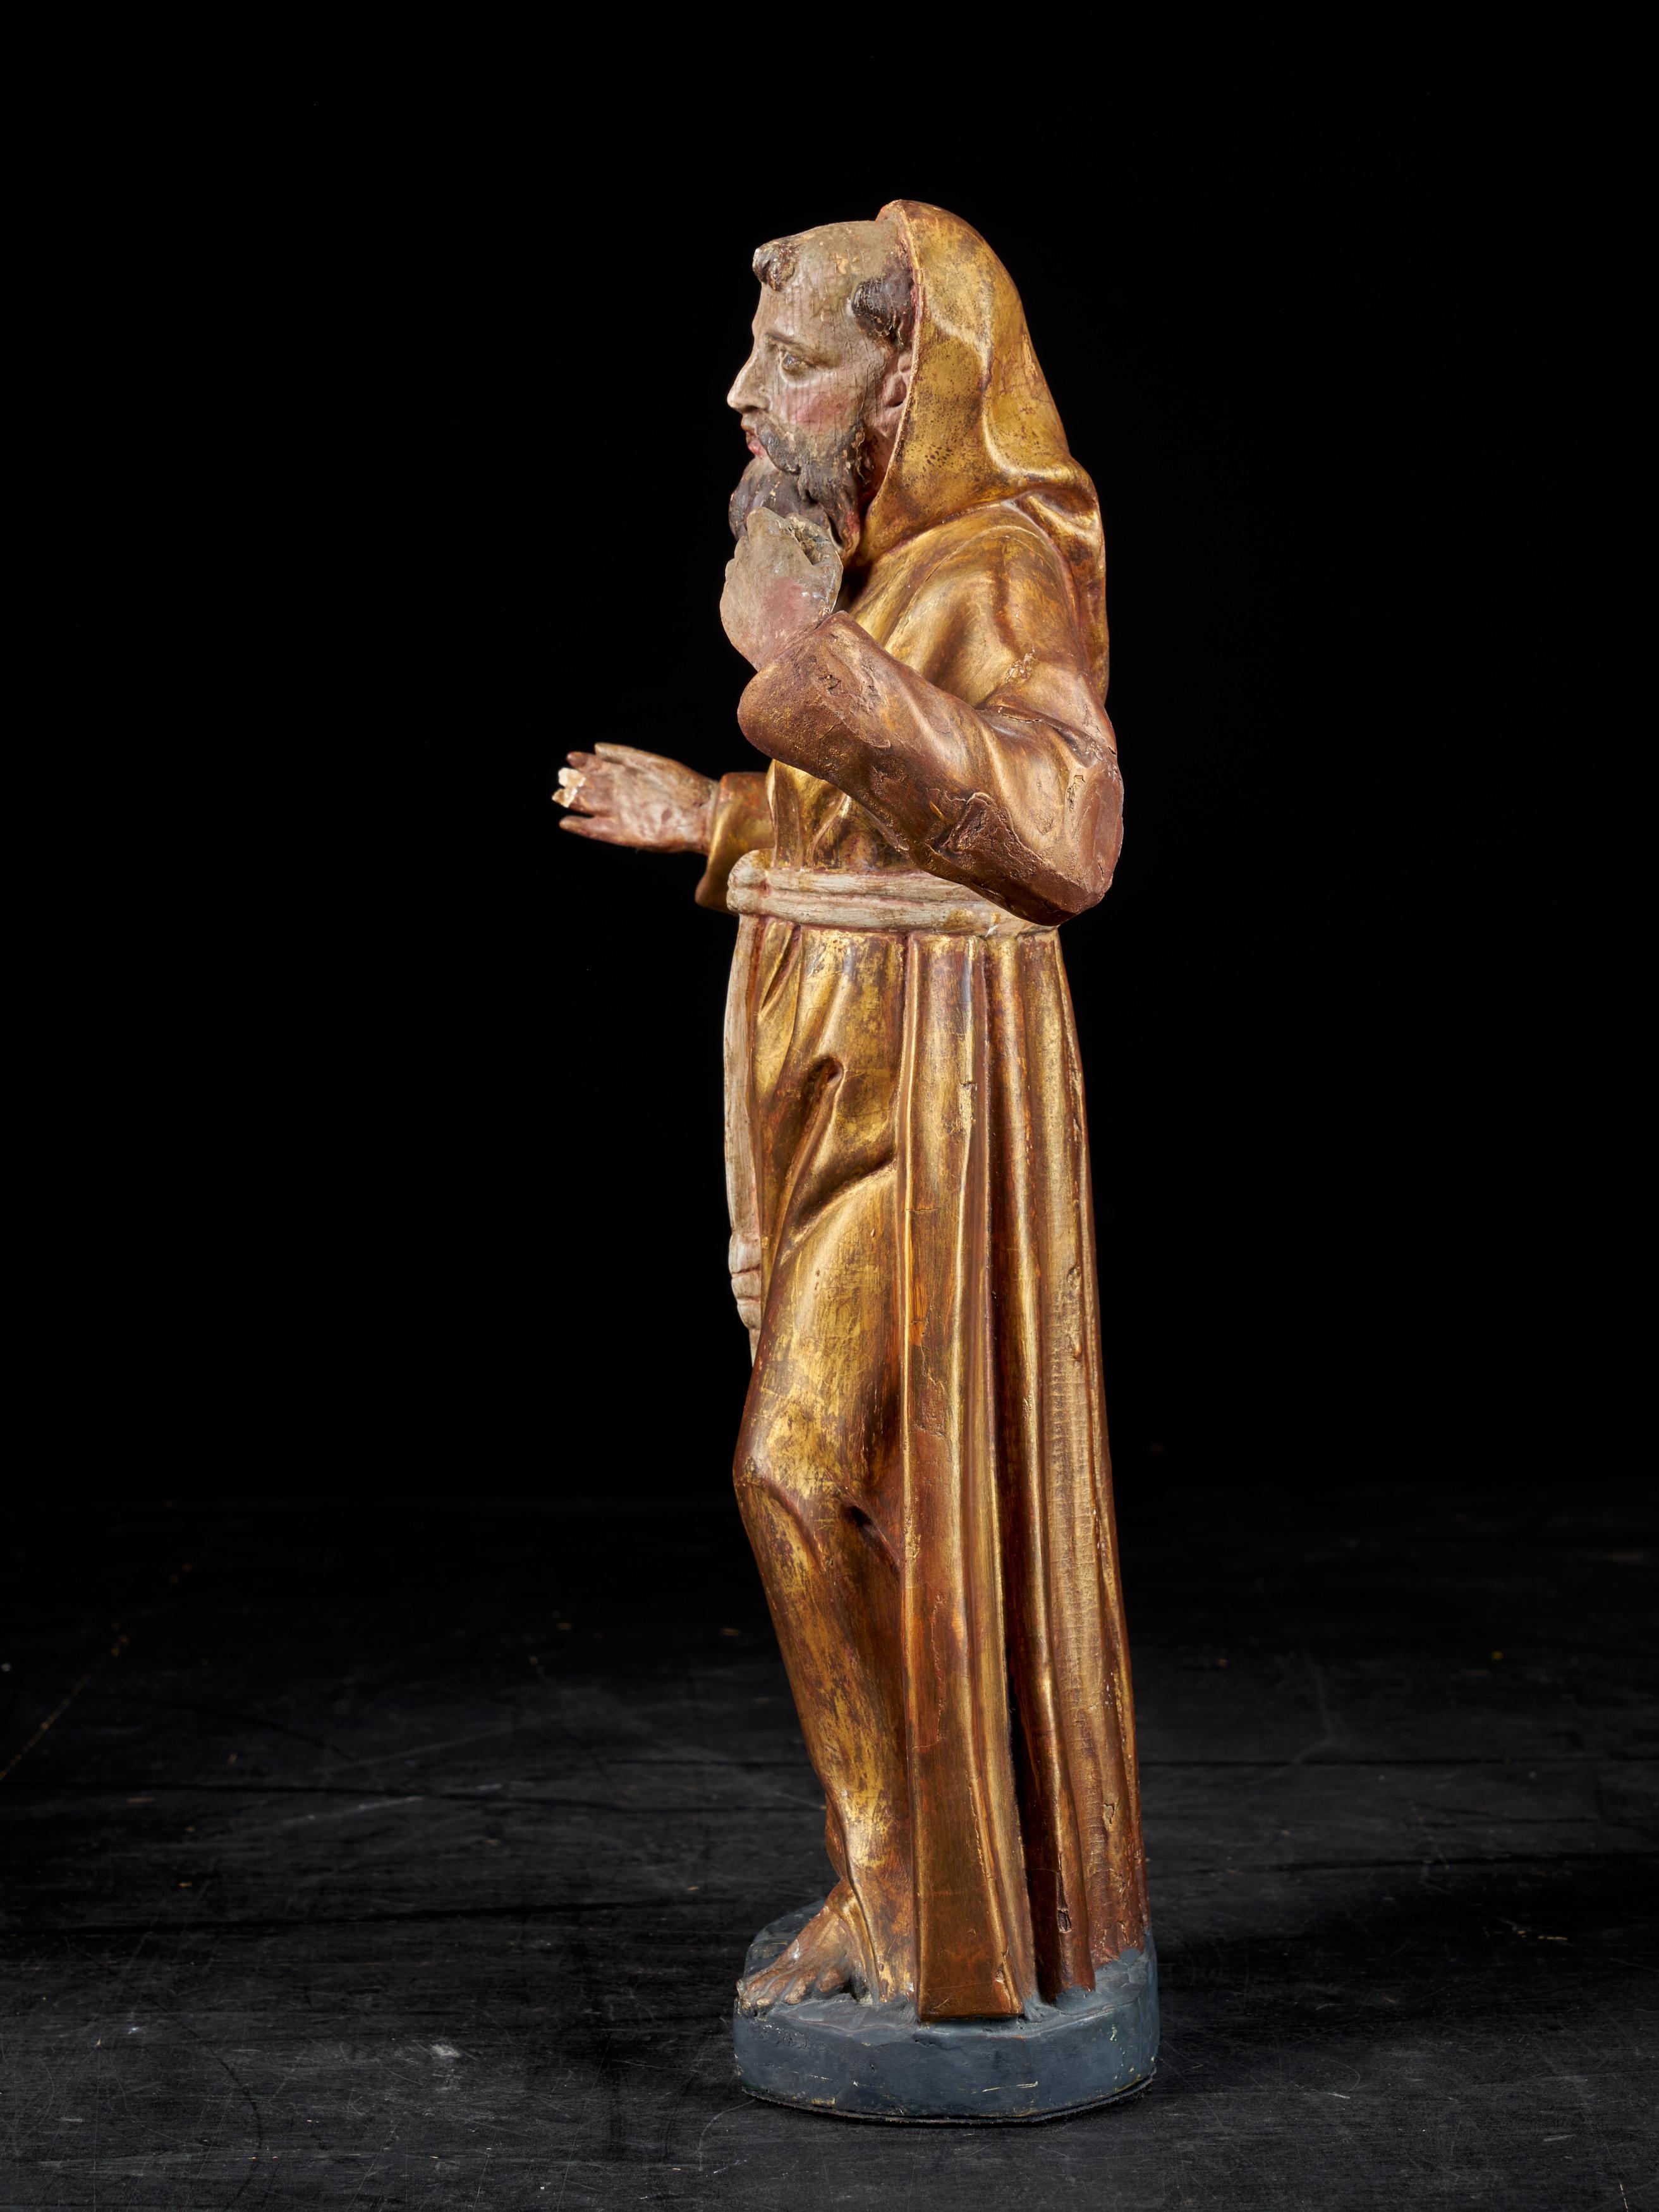 Spanish Wooden Statue of Saint-Francis with the Original Polychromy and Gilding